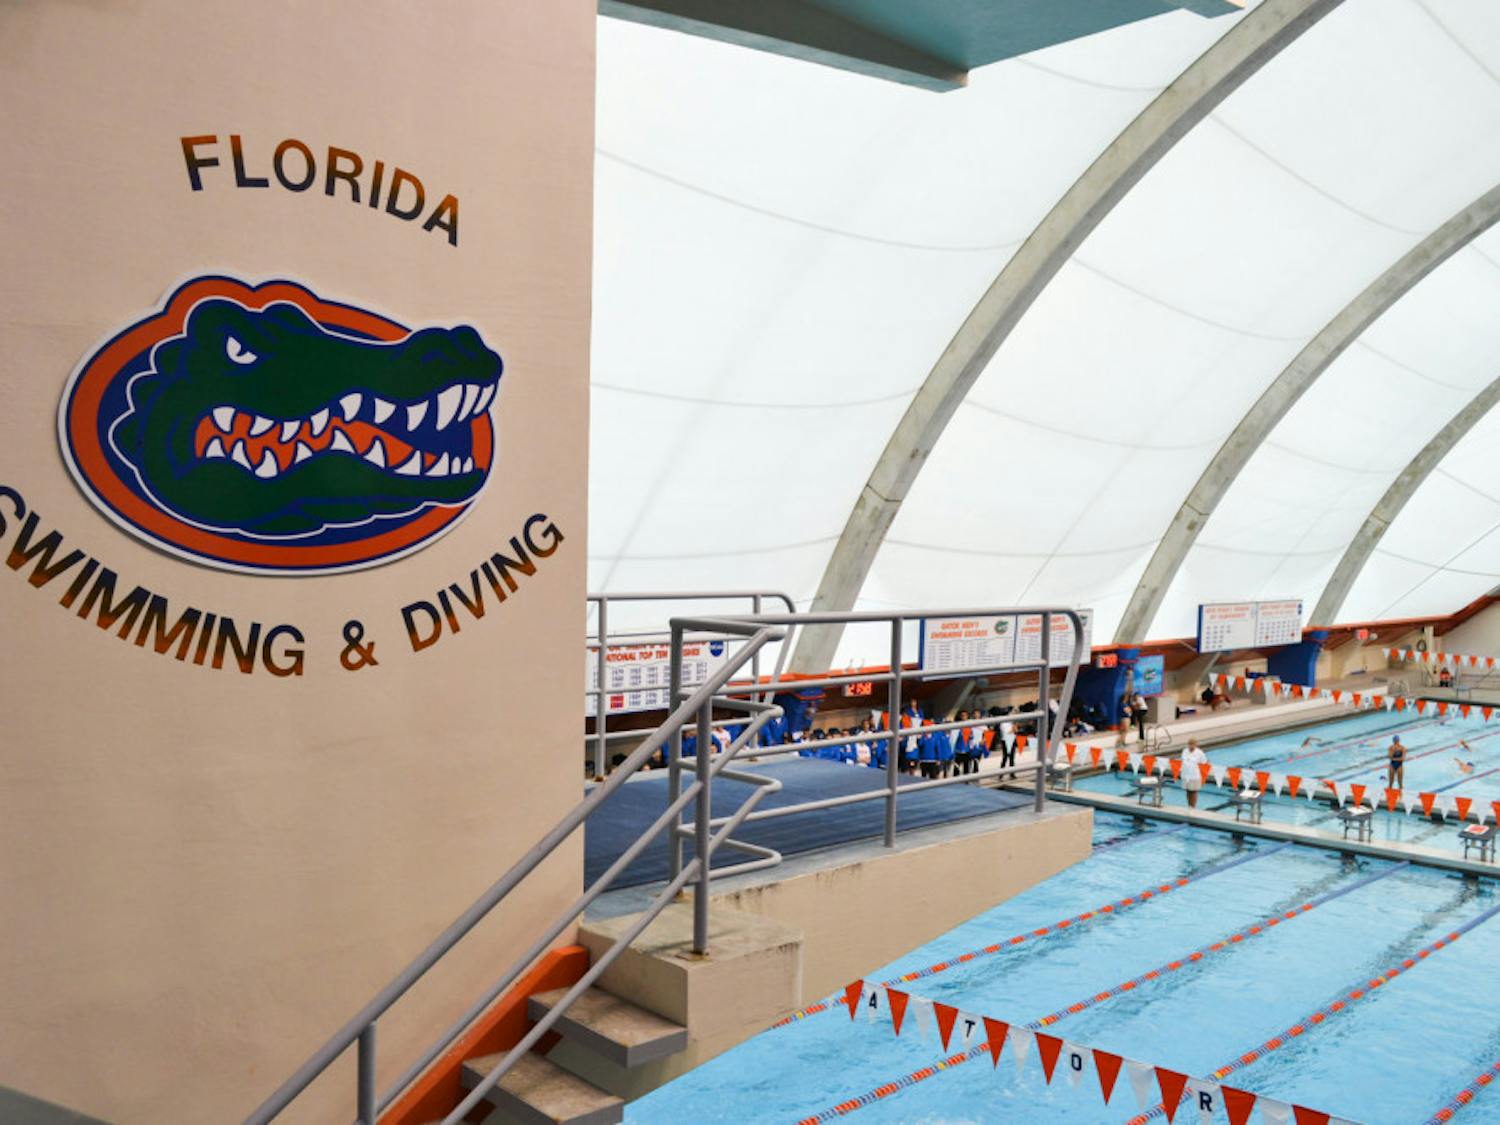 Gators women’s swimming team returns&nbsp;to the pool at this week’s NCAA Championships.